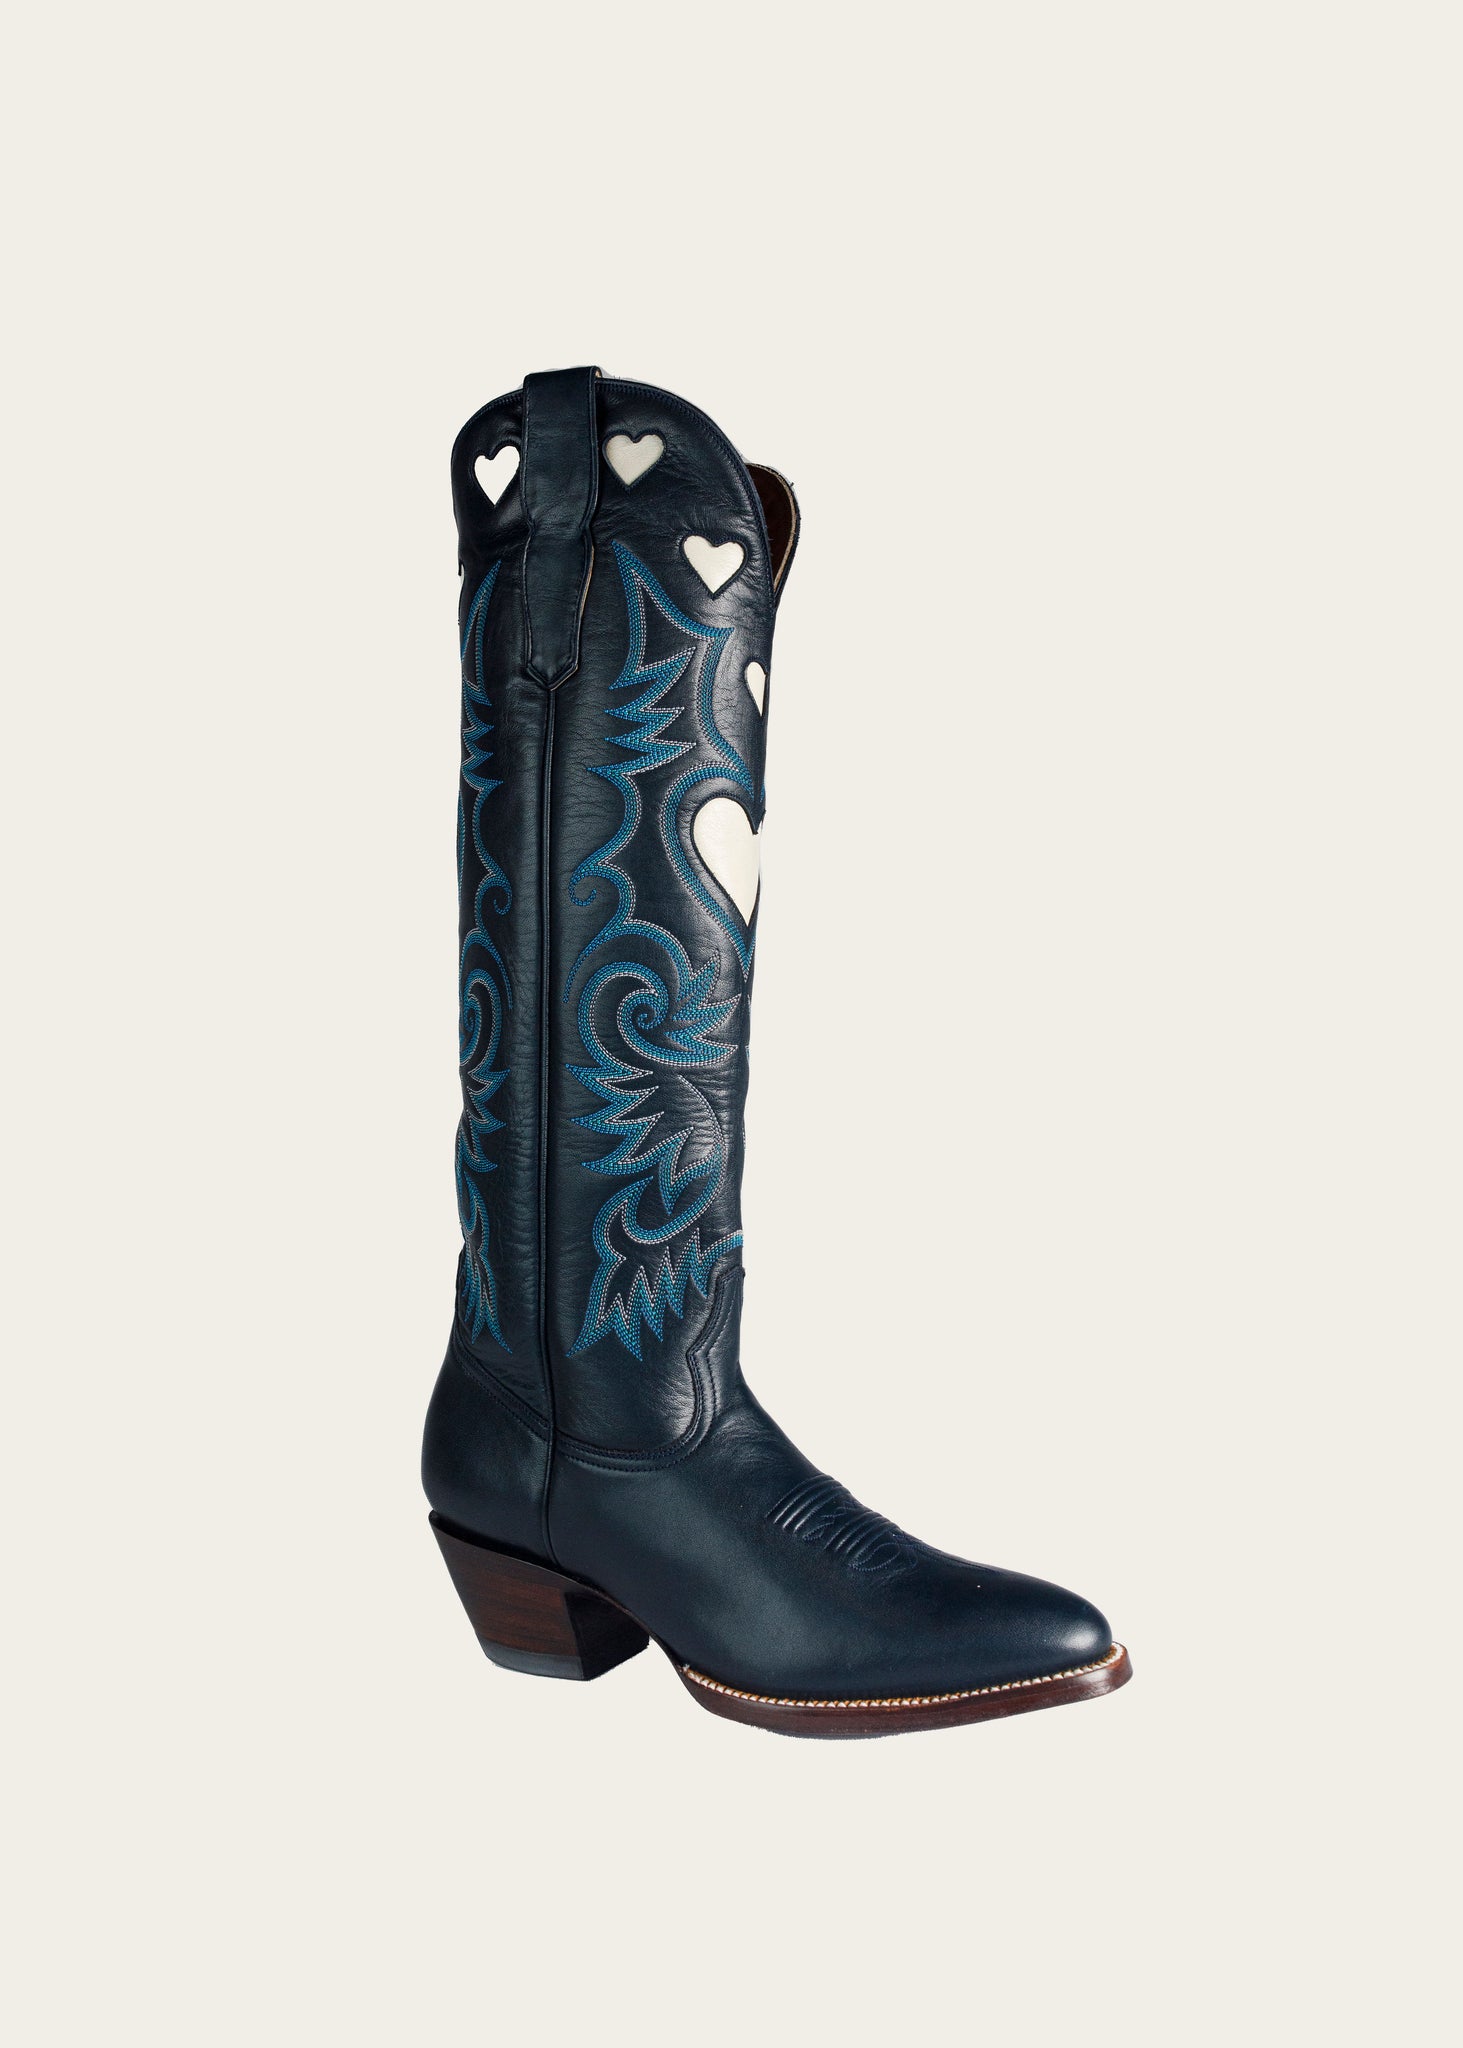 Navy Heart Boot Limited Edition - CITY Boots